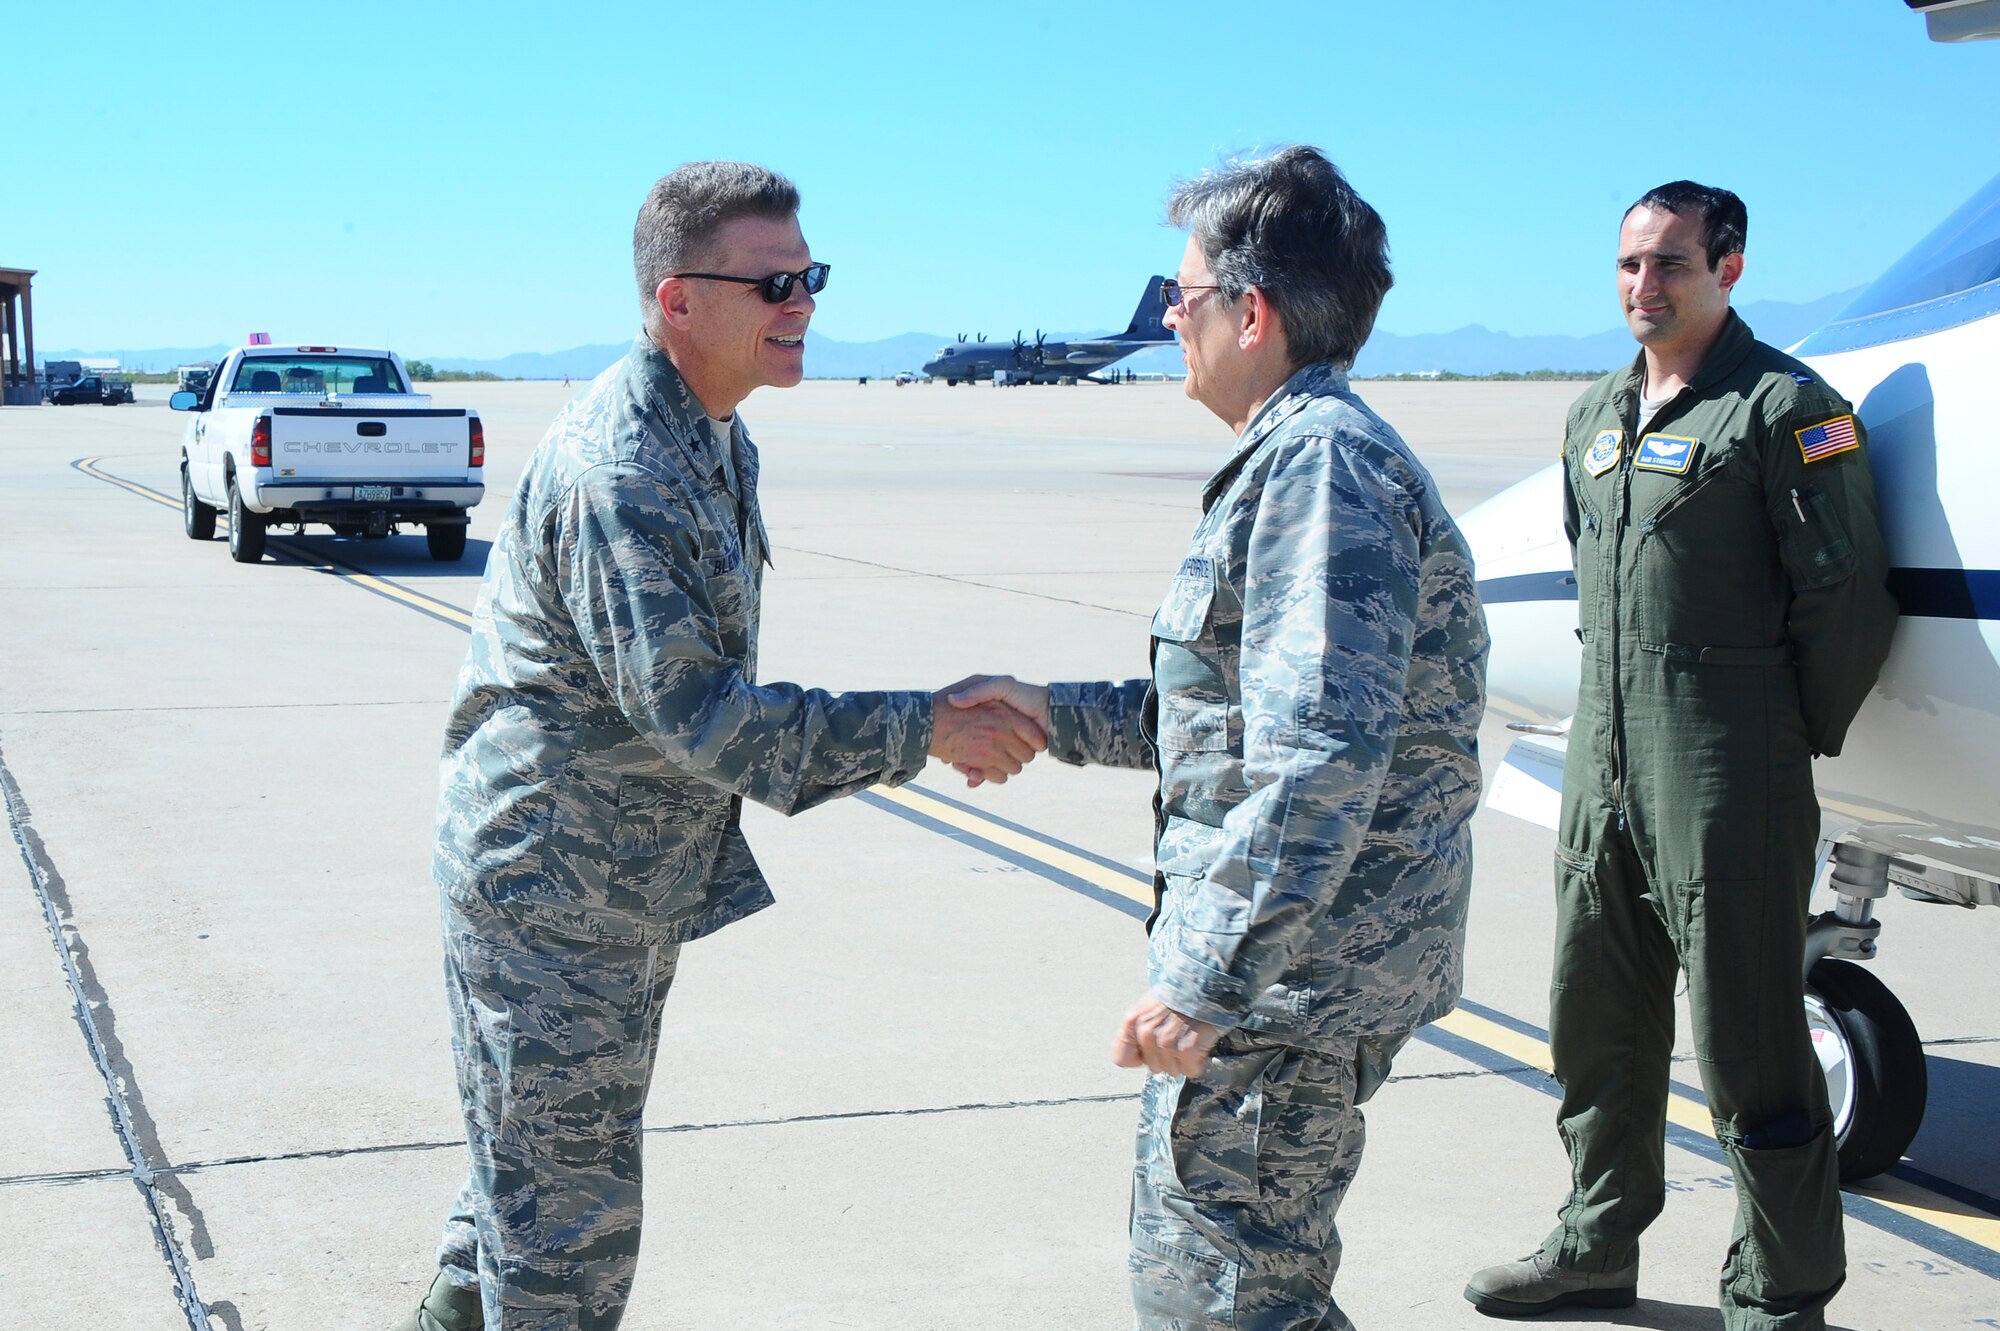 U.S. Air Force Brigadier General Steven Bleymaier, commander of Ogden Air Logistics Complex, greets General Ellen Pawlikowski, commander of Air Force Materiel Command, at Davis-Monthan Air Force Base, Ariz., July 12, 2016. The mission of the Air Force Materiel Command is to 
deliver and support agile war-winning capabilities. (U.S. Air Force photo by Airman 1st Class Mya M. Crosby/Released)
